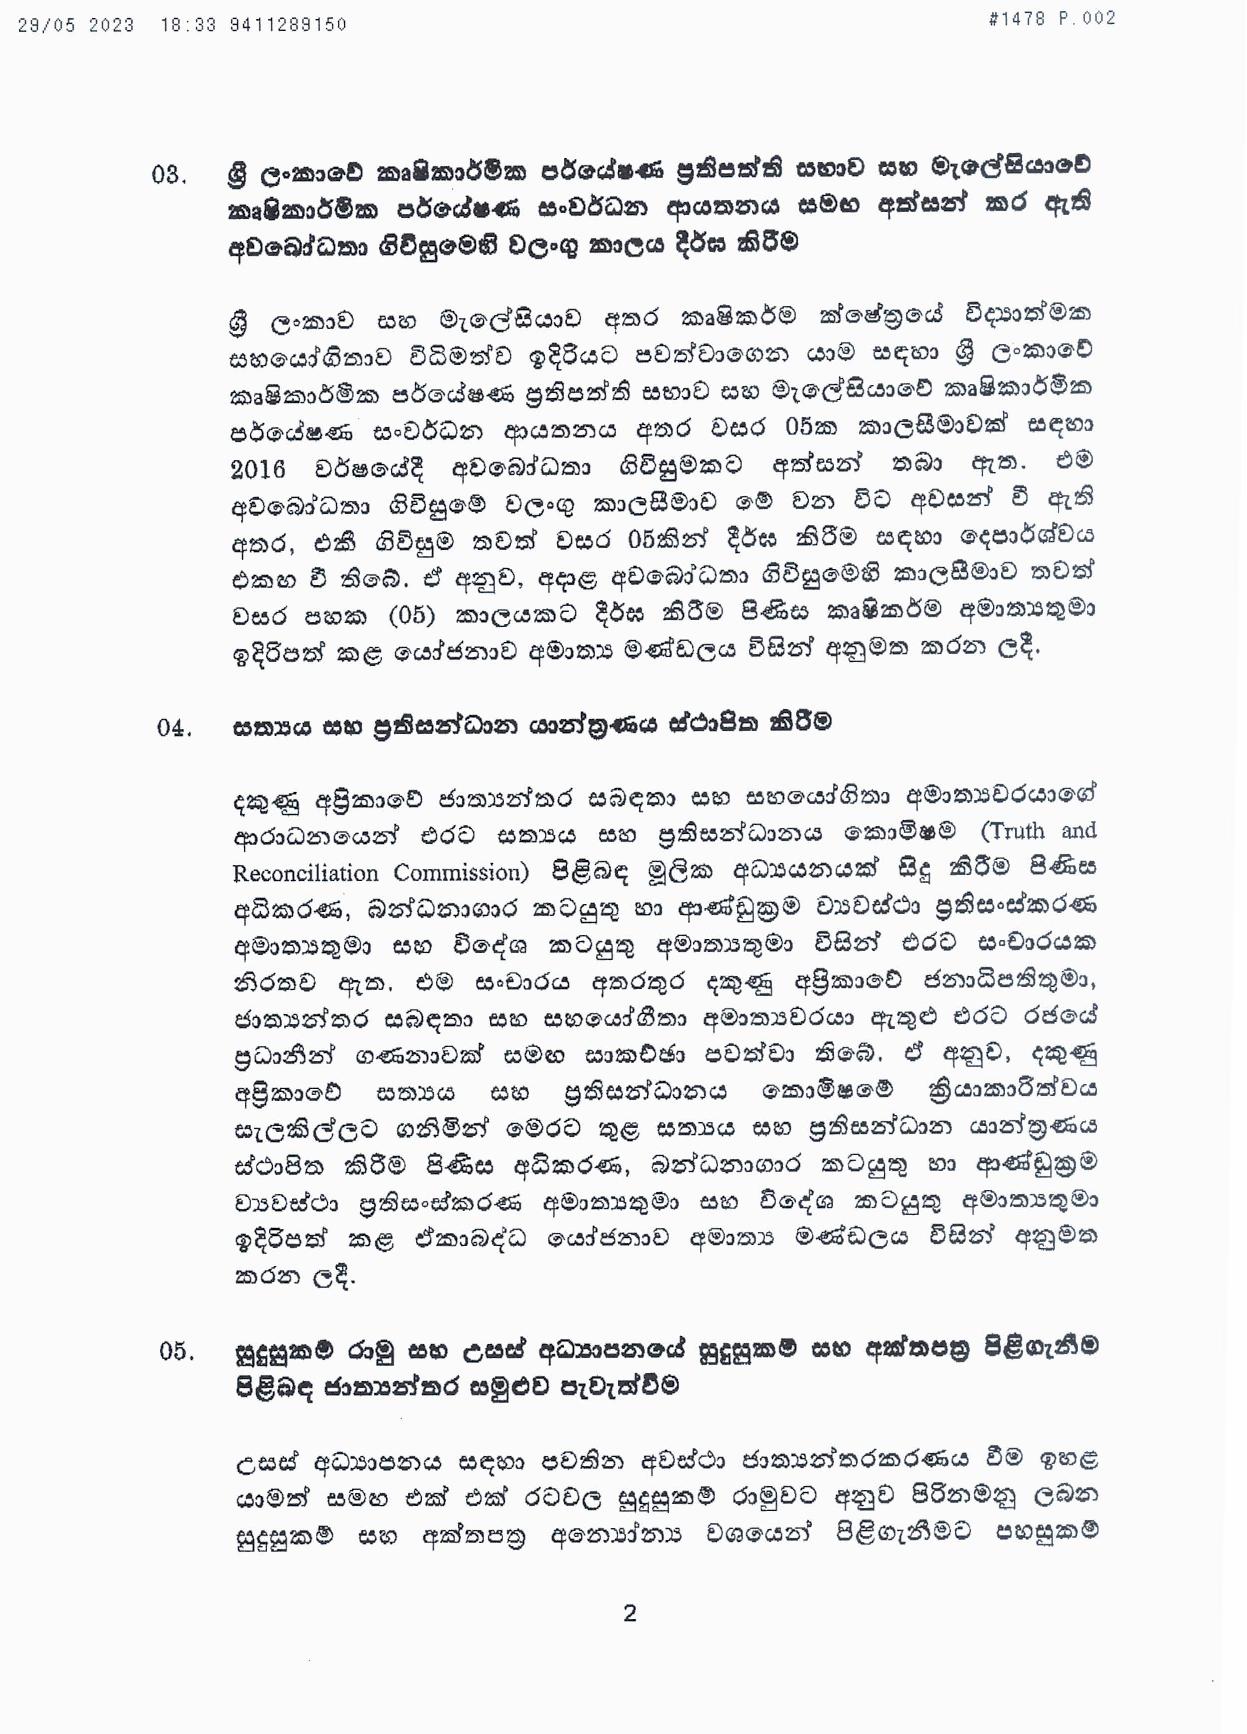 Cabinet Decisions on 29.05.2023 page 002